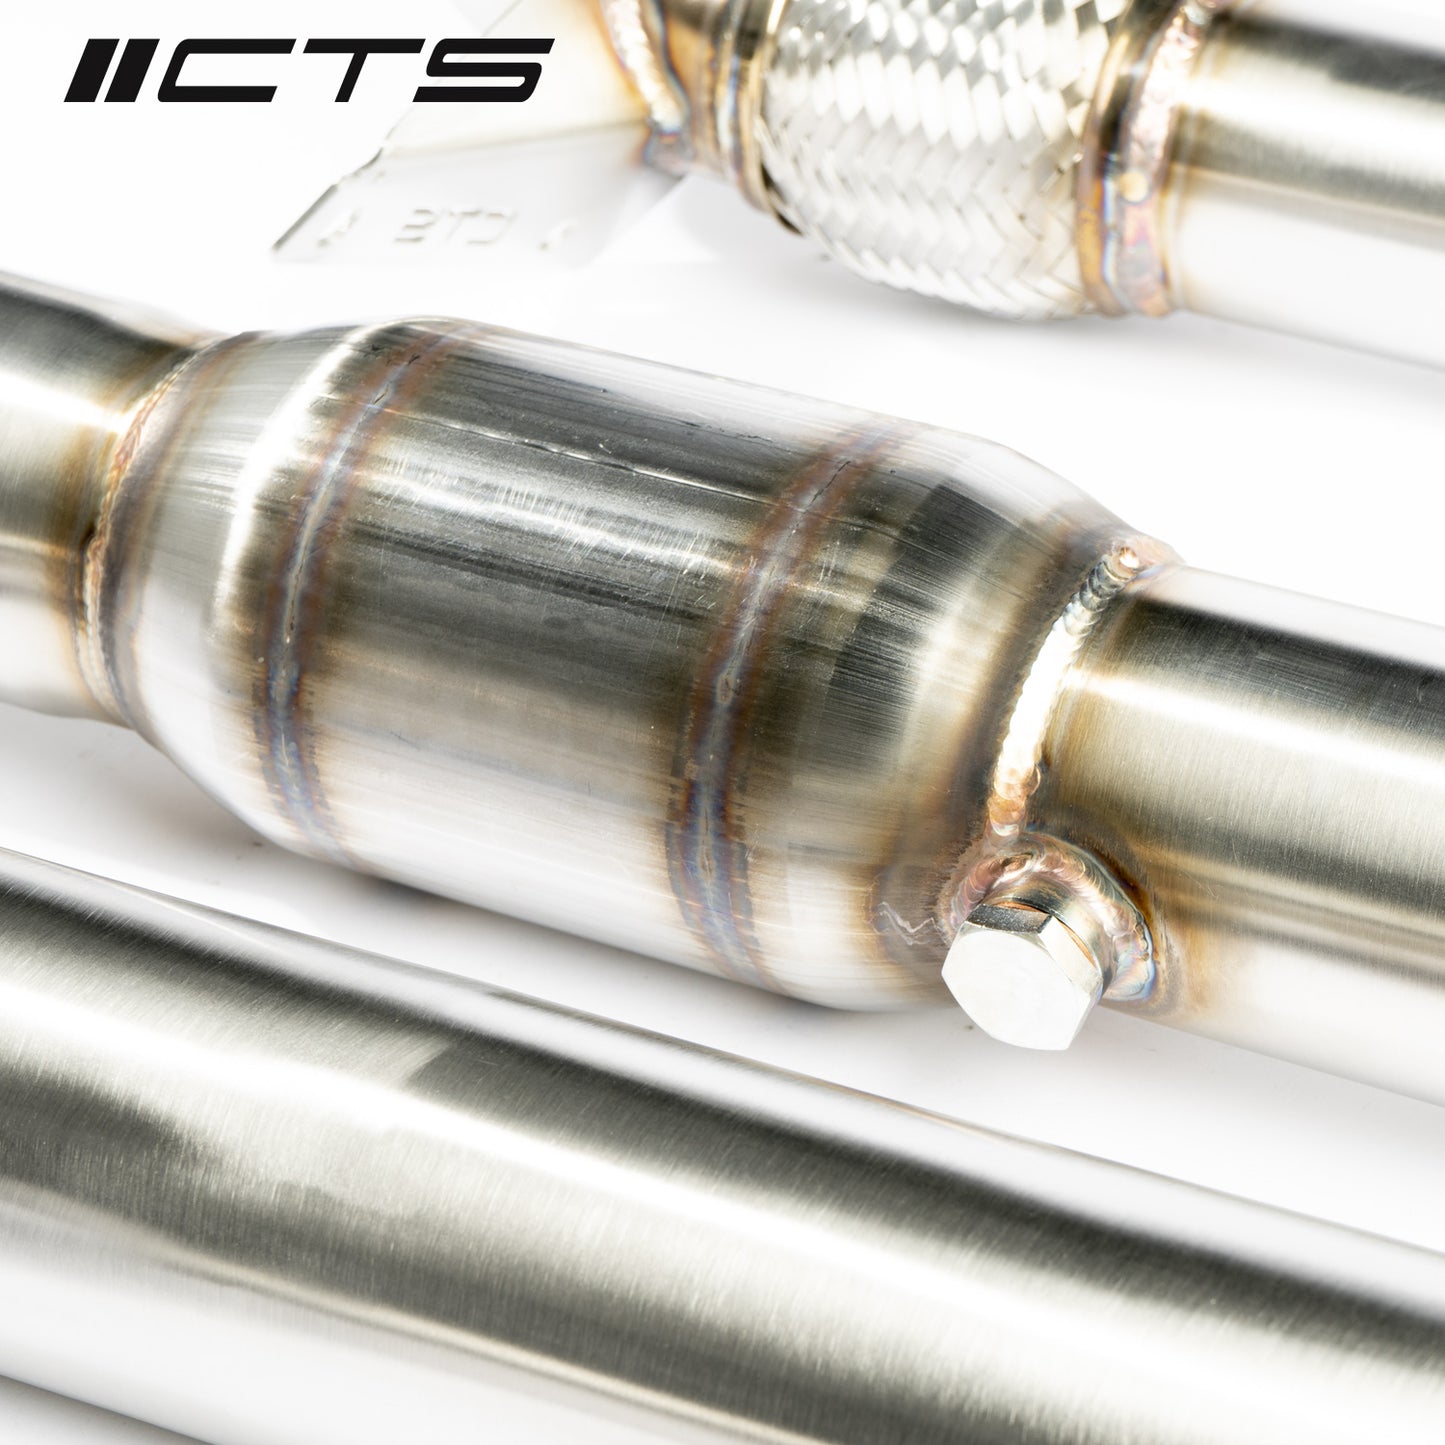 CTS High Flow Catted/Catless 3" Downpipe (AWD) - VW Golf R MK6 Audi S3 8P